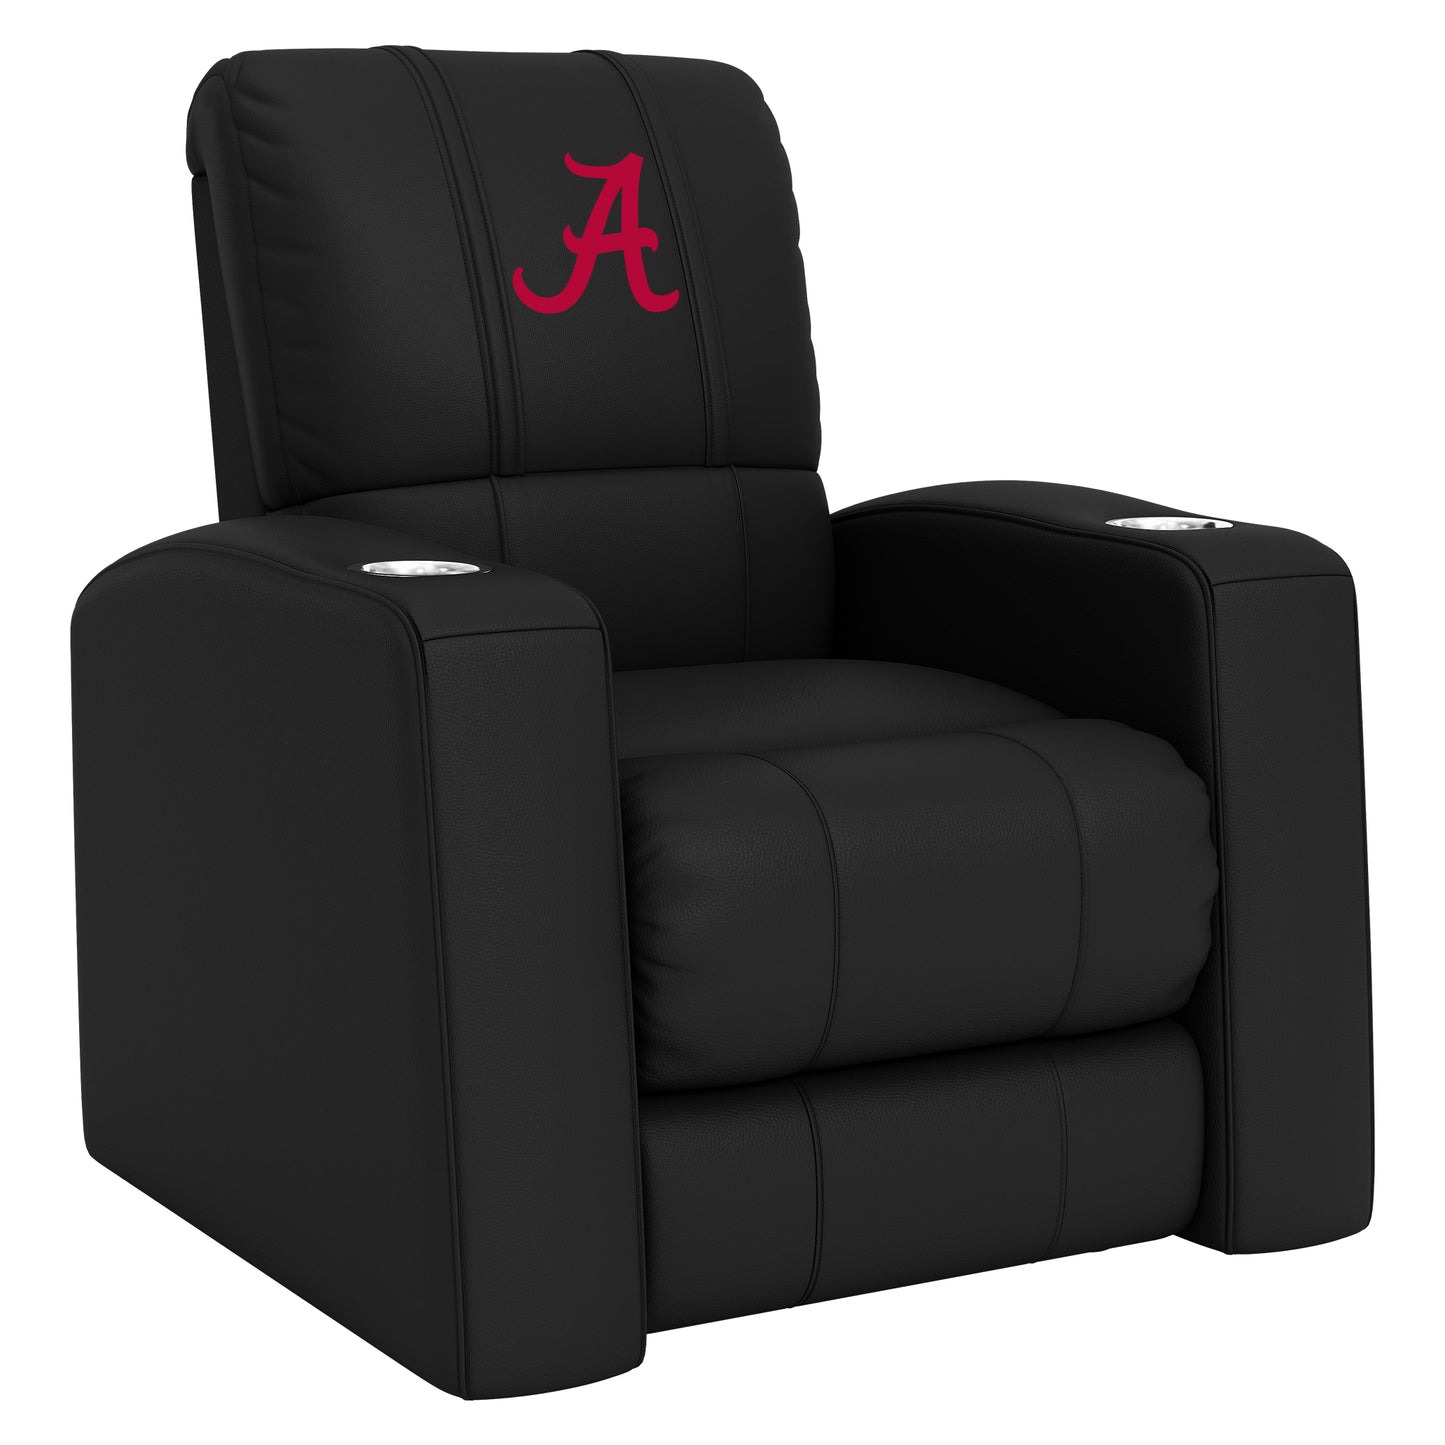 Relax Home Theater Recliner with Alabama Crimson Tide Red A Logo